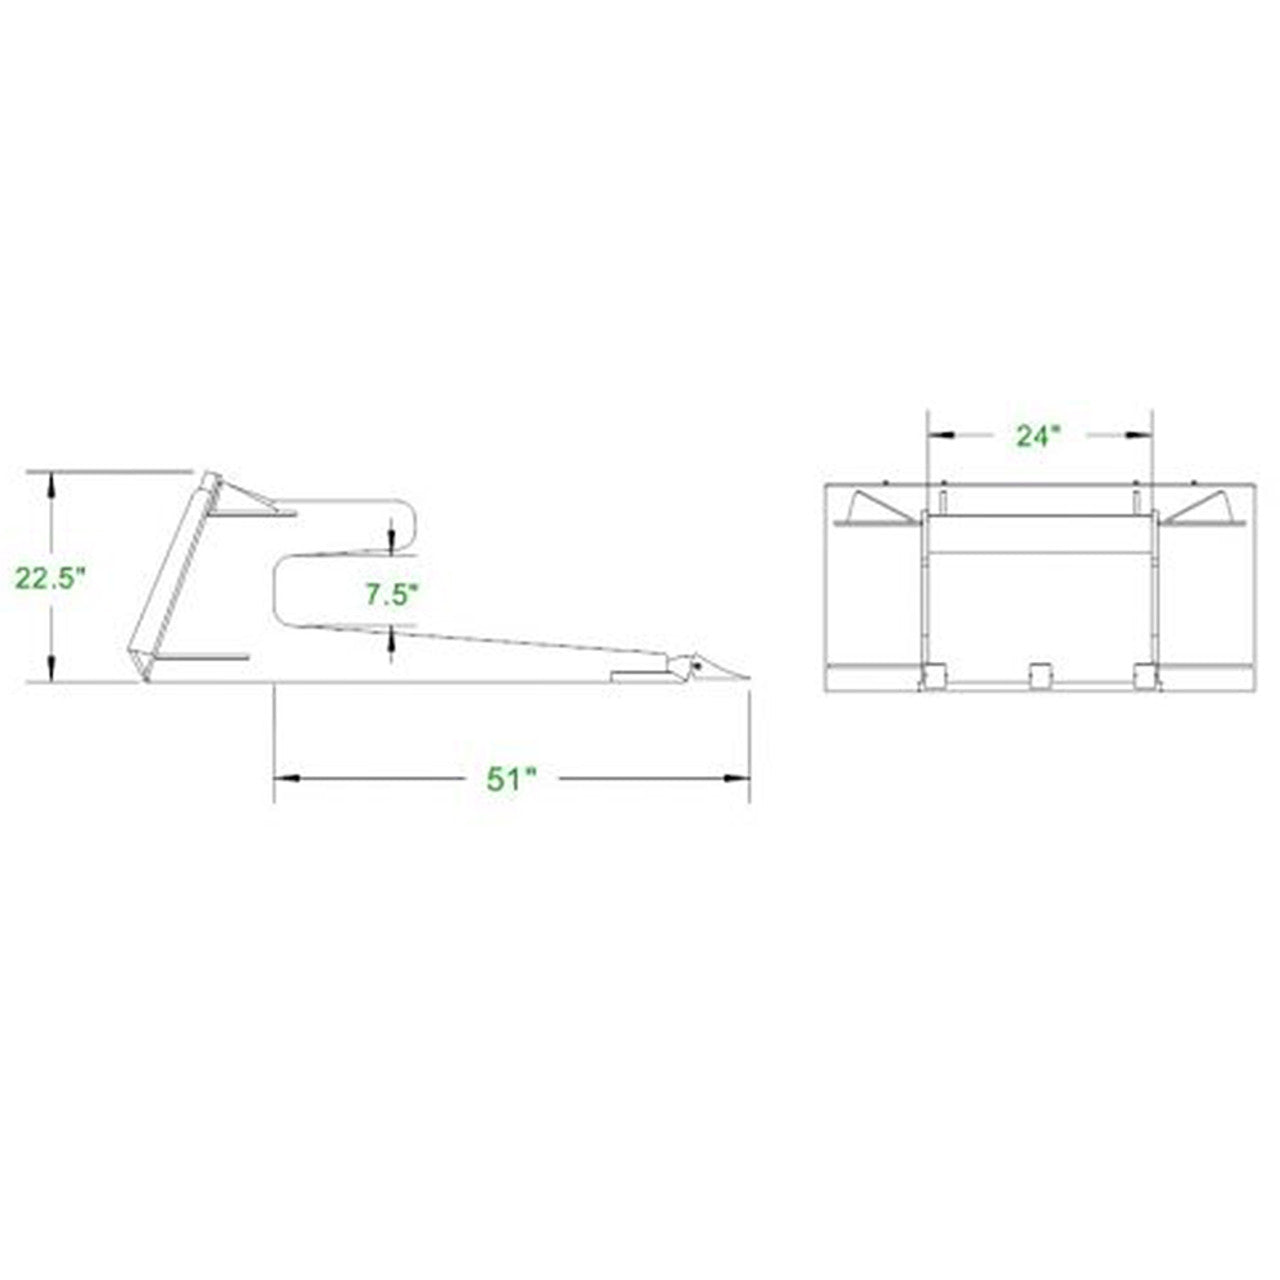 CID 625 LBS CONCRETE CLAW WITH TOP & BOTTOM PLATES FOR SKID STEER